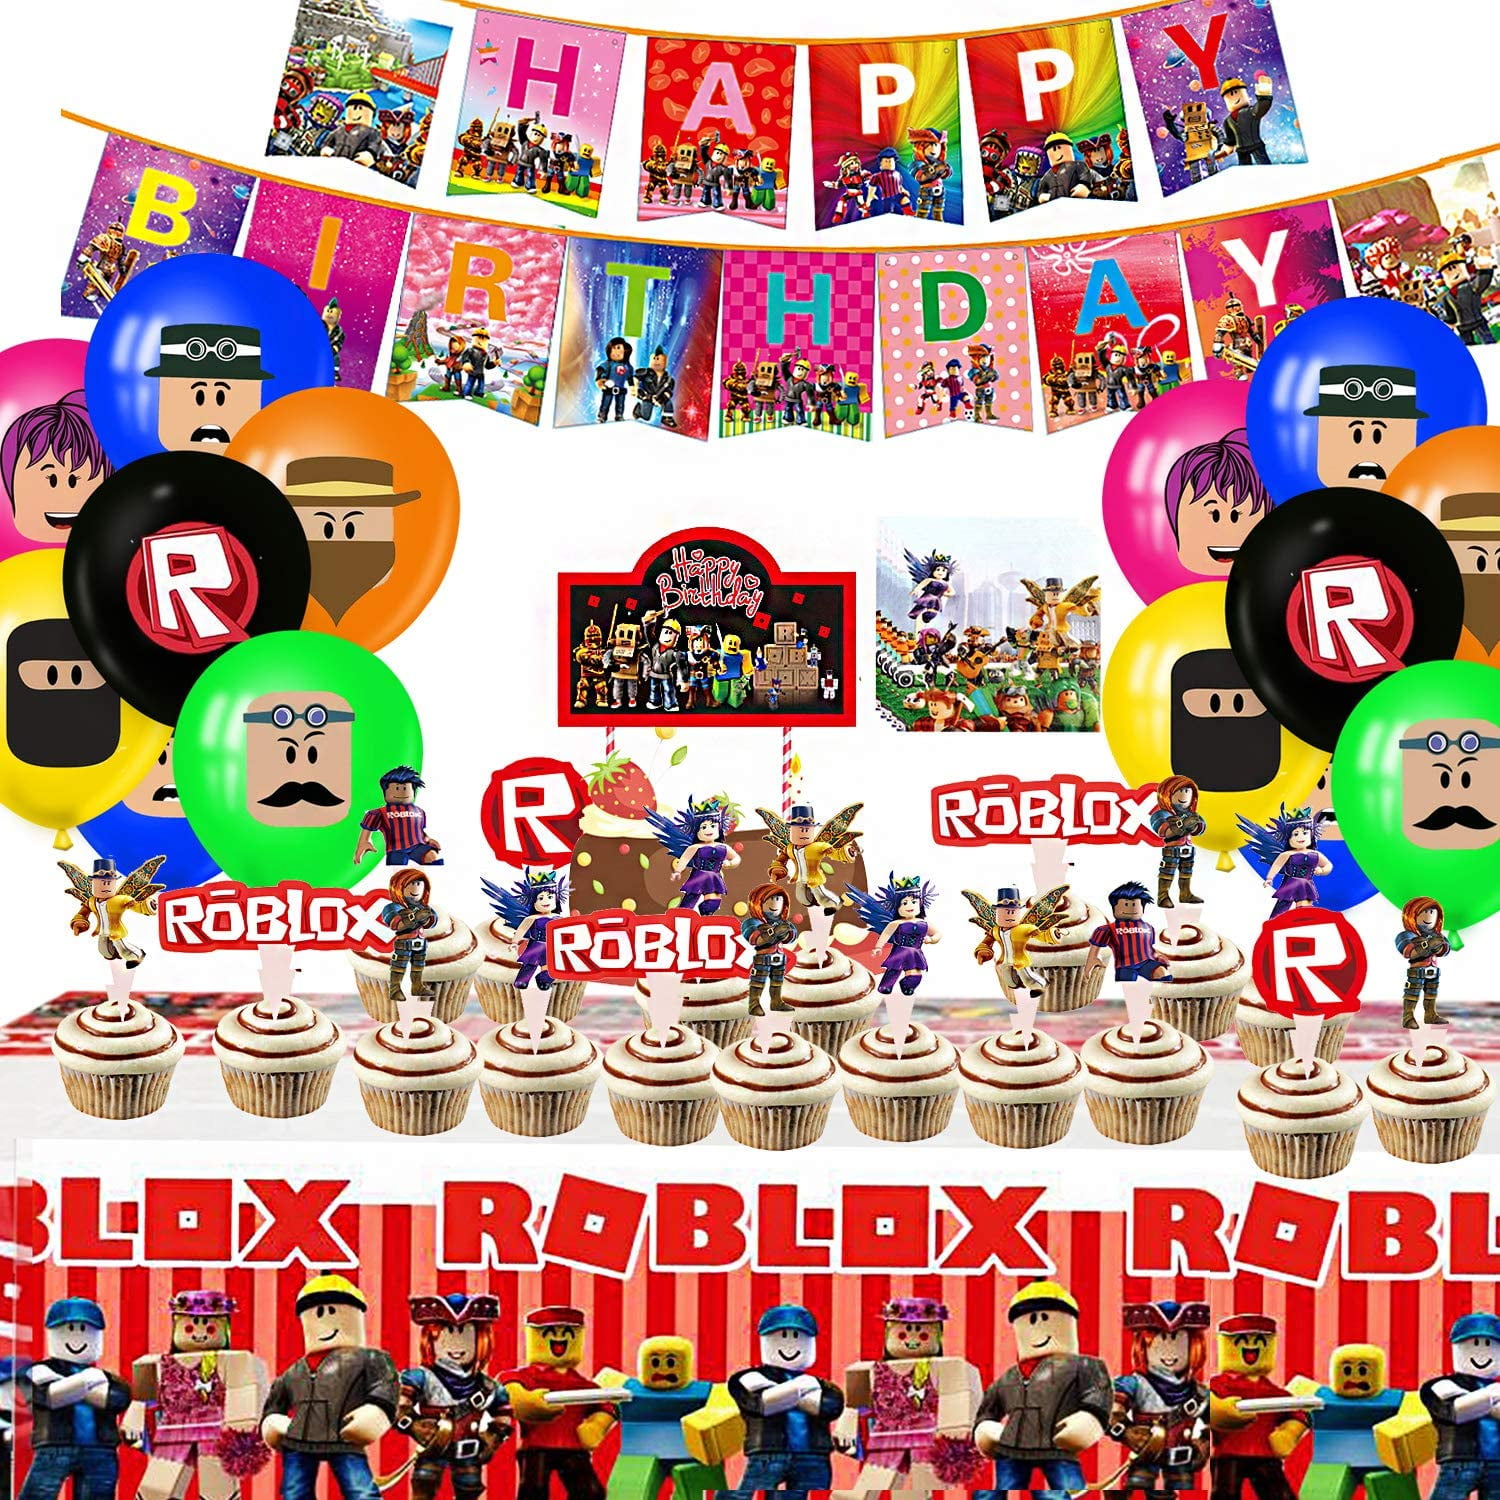 Robot Blocks Party Supplies For Kids Birthday Ro Blox Decorations Included Banners Cake Topper Cupcake Toppers Tablecover Napkins And Balloons For Kids Party Supplies Robot Blocks Birthday Party Walmart Com Walmart Com - roblox party plates and napkins